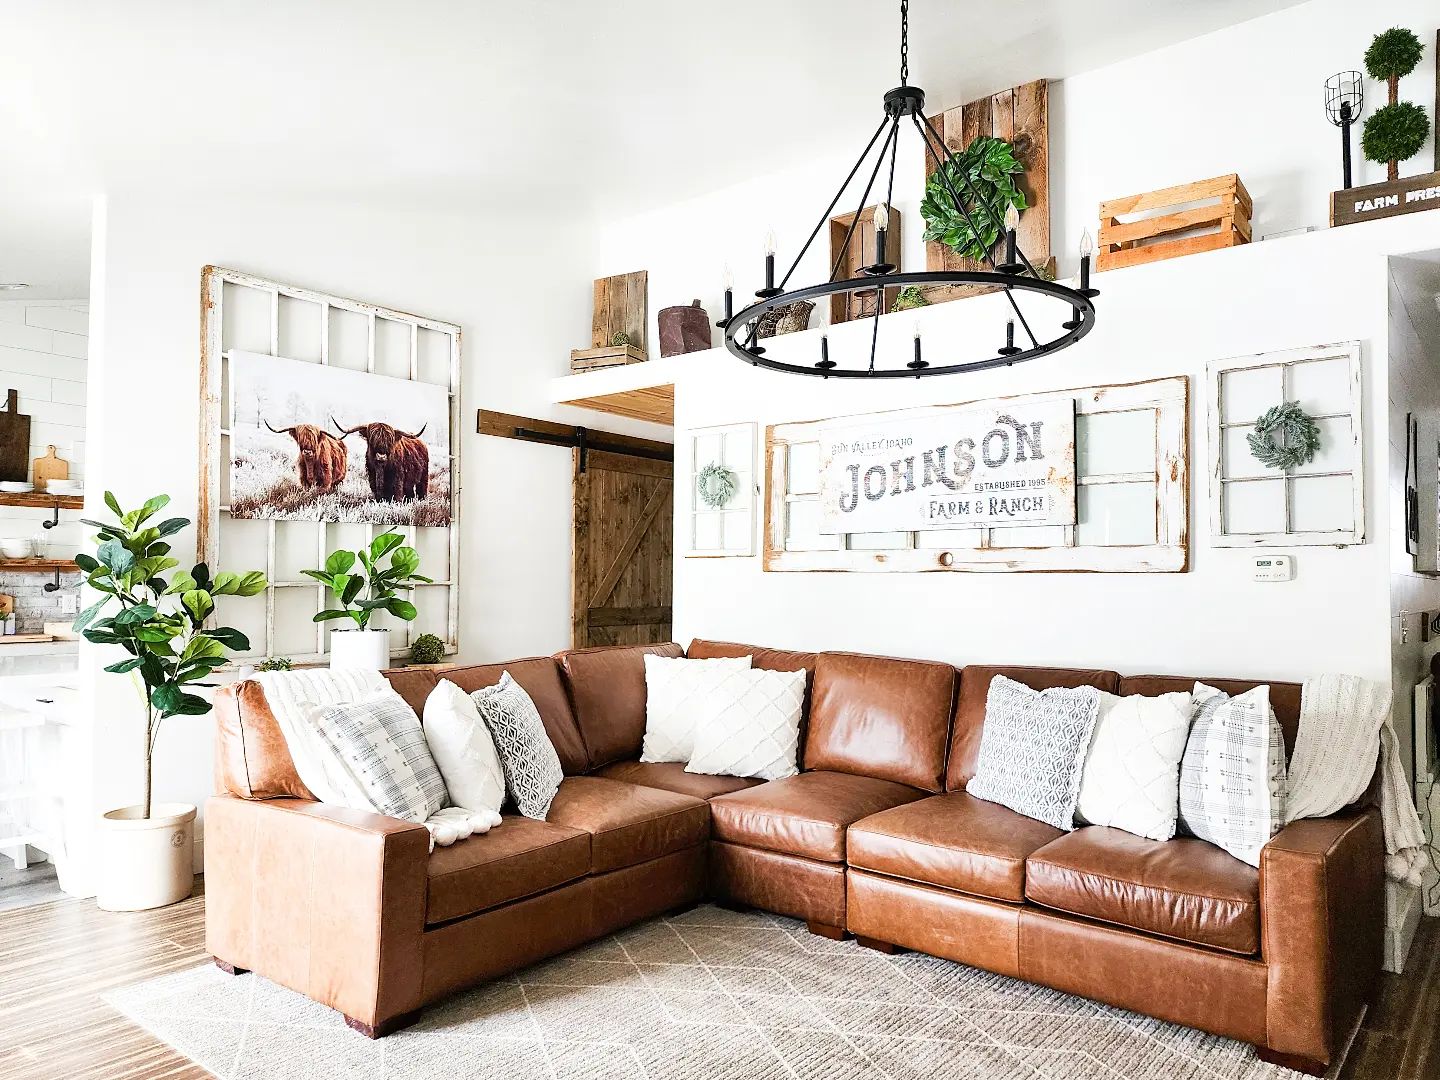 Living room with L- shaped sectional leather sofa, decor pieces, and chandelier